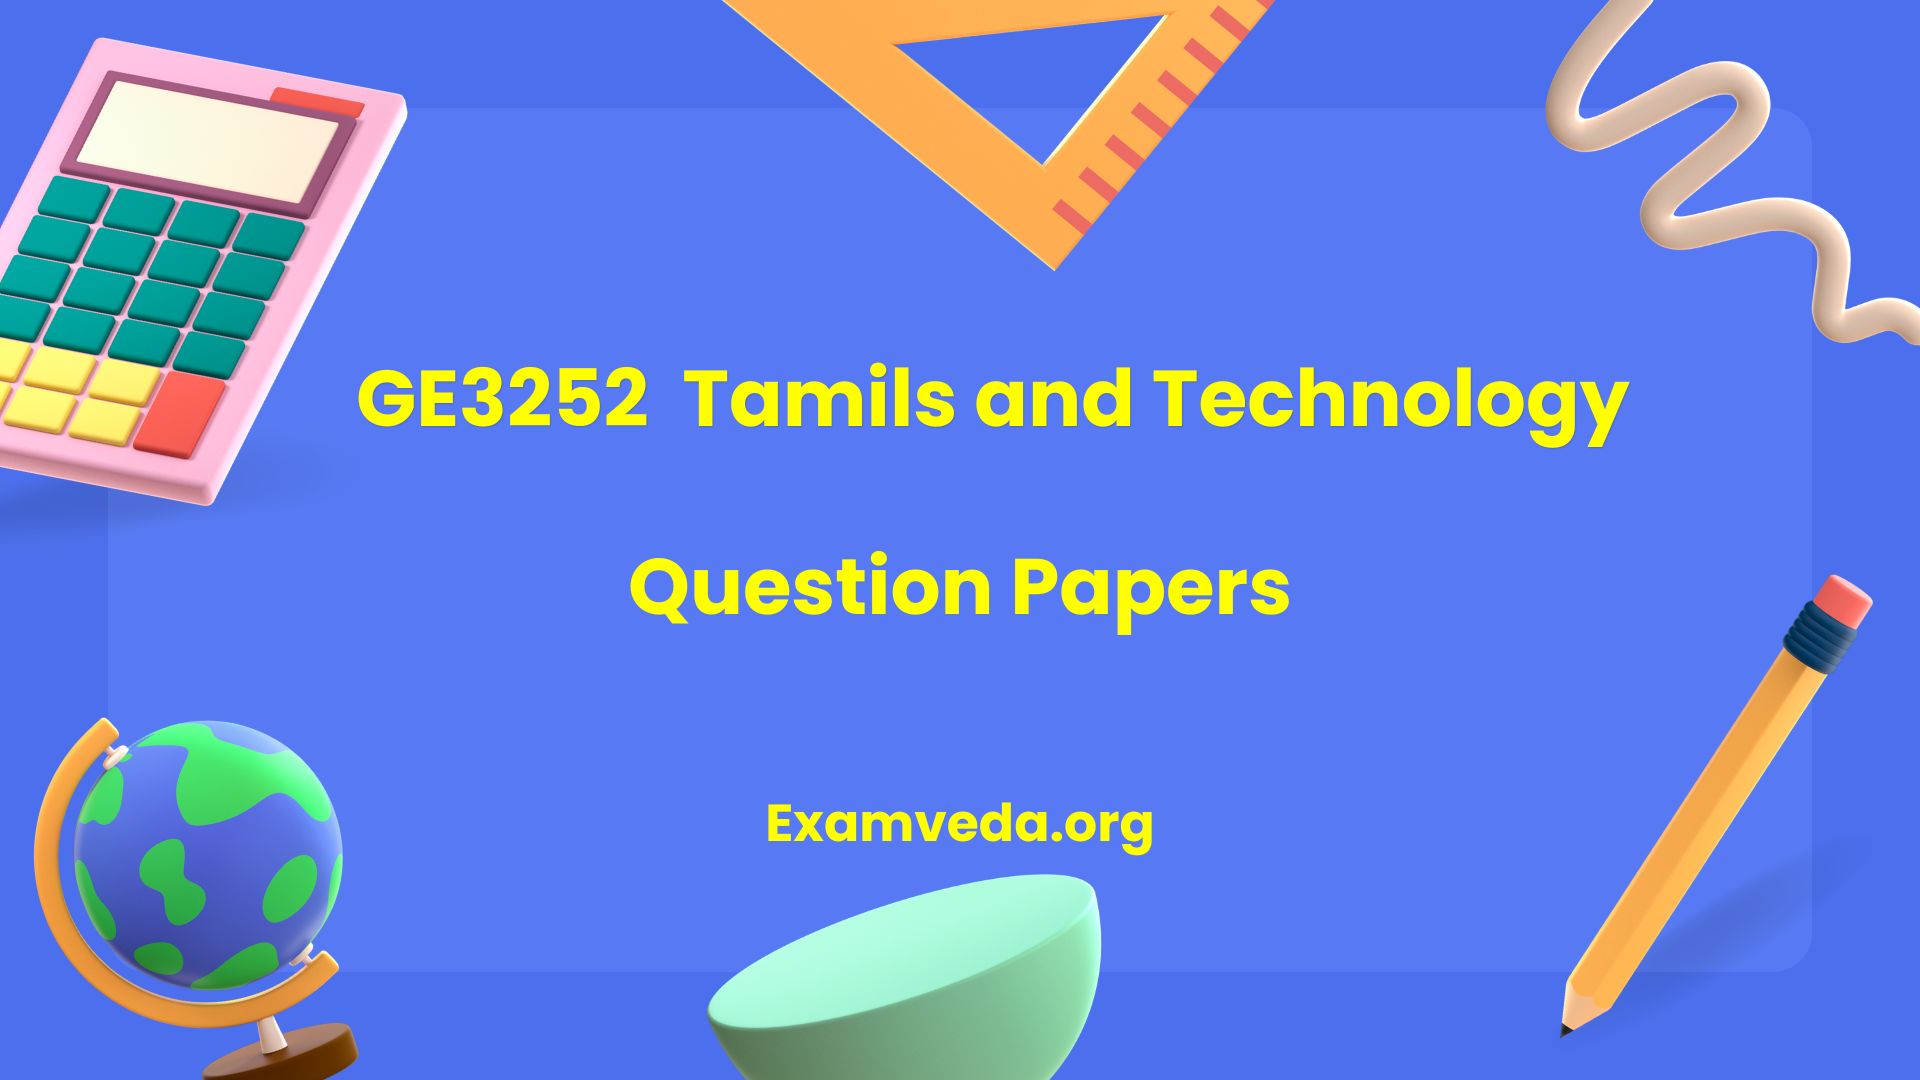 GE3252 தமிழரும் தொழில்நுட்பமும் Tamils and Technology Question Papers